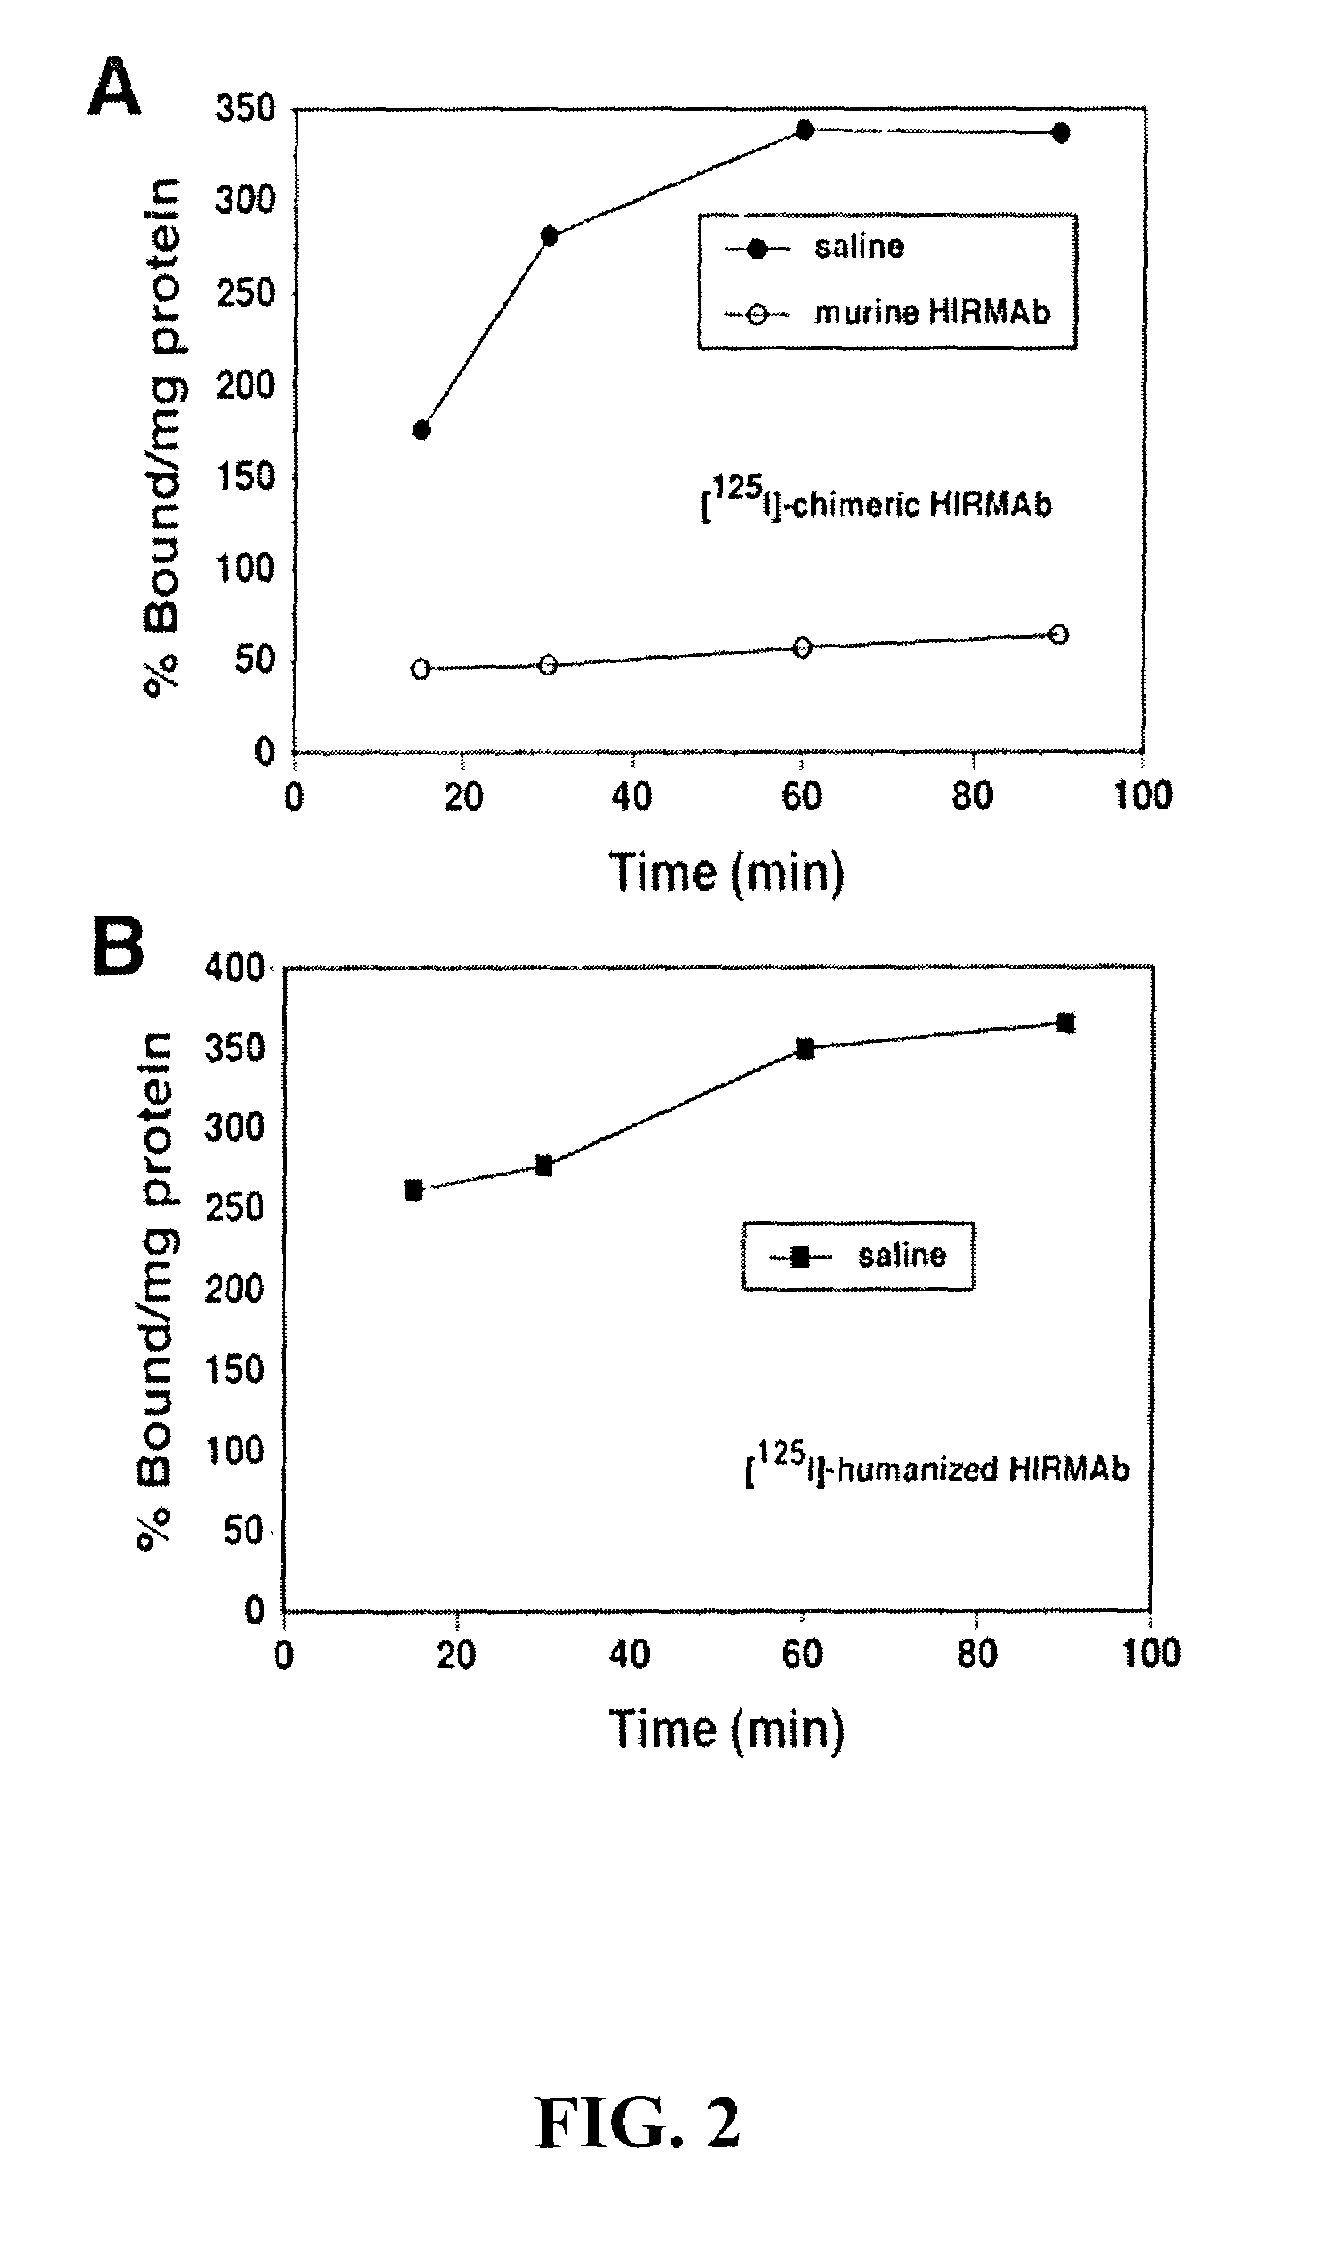 Delivery of pharmaceutical agents via the human insulin receptor